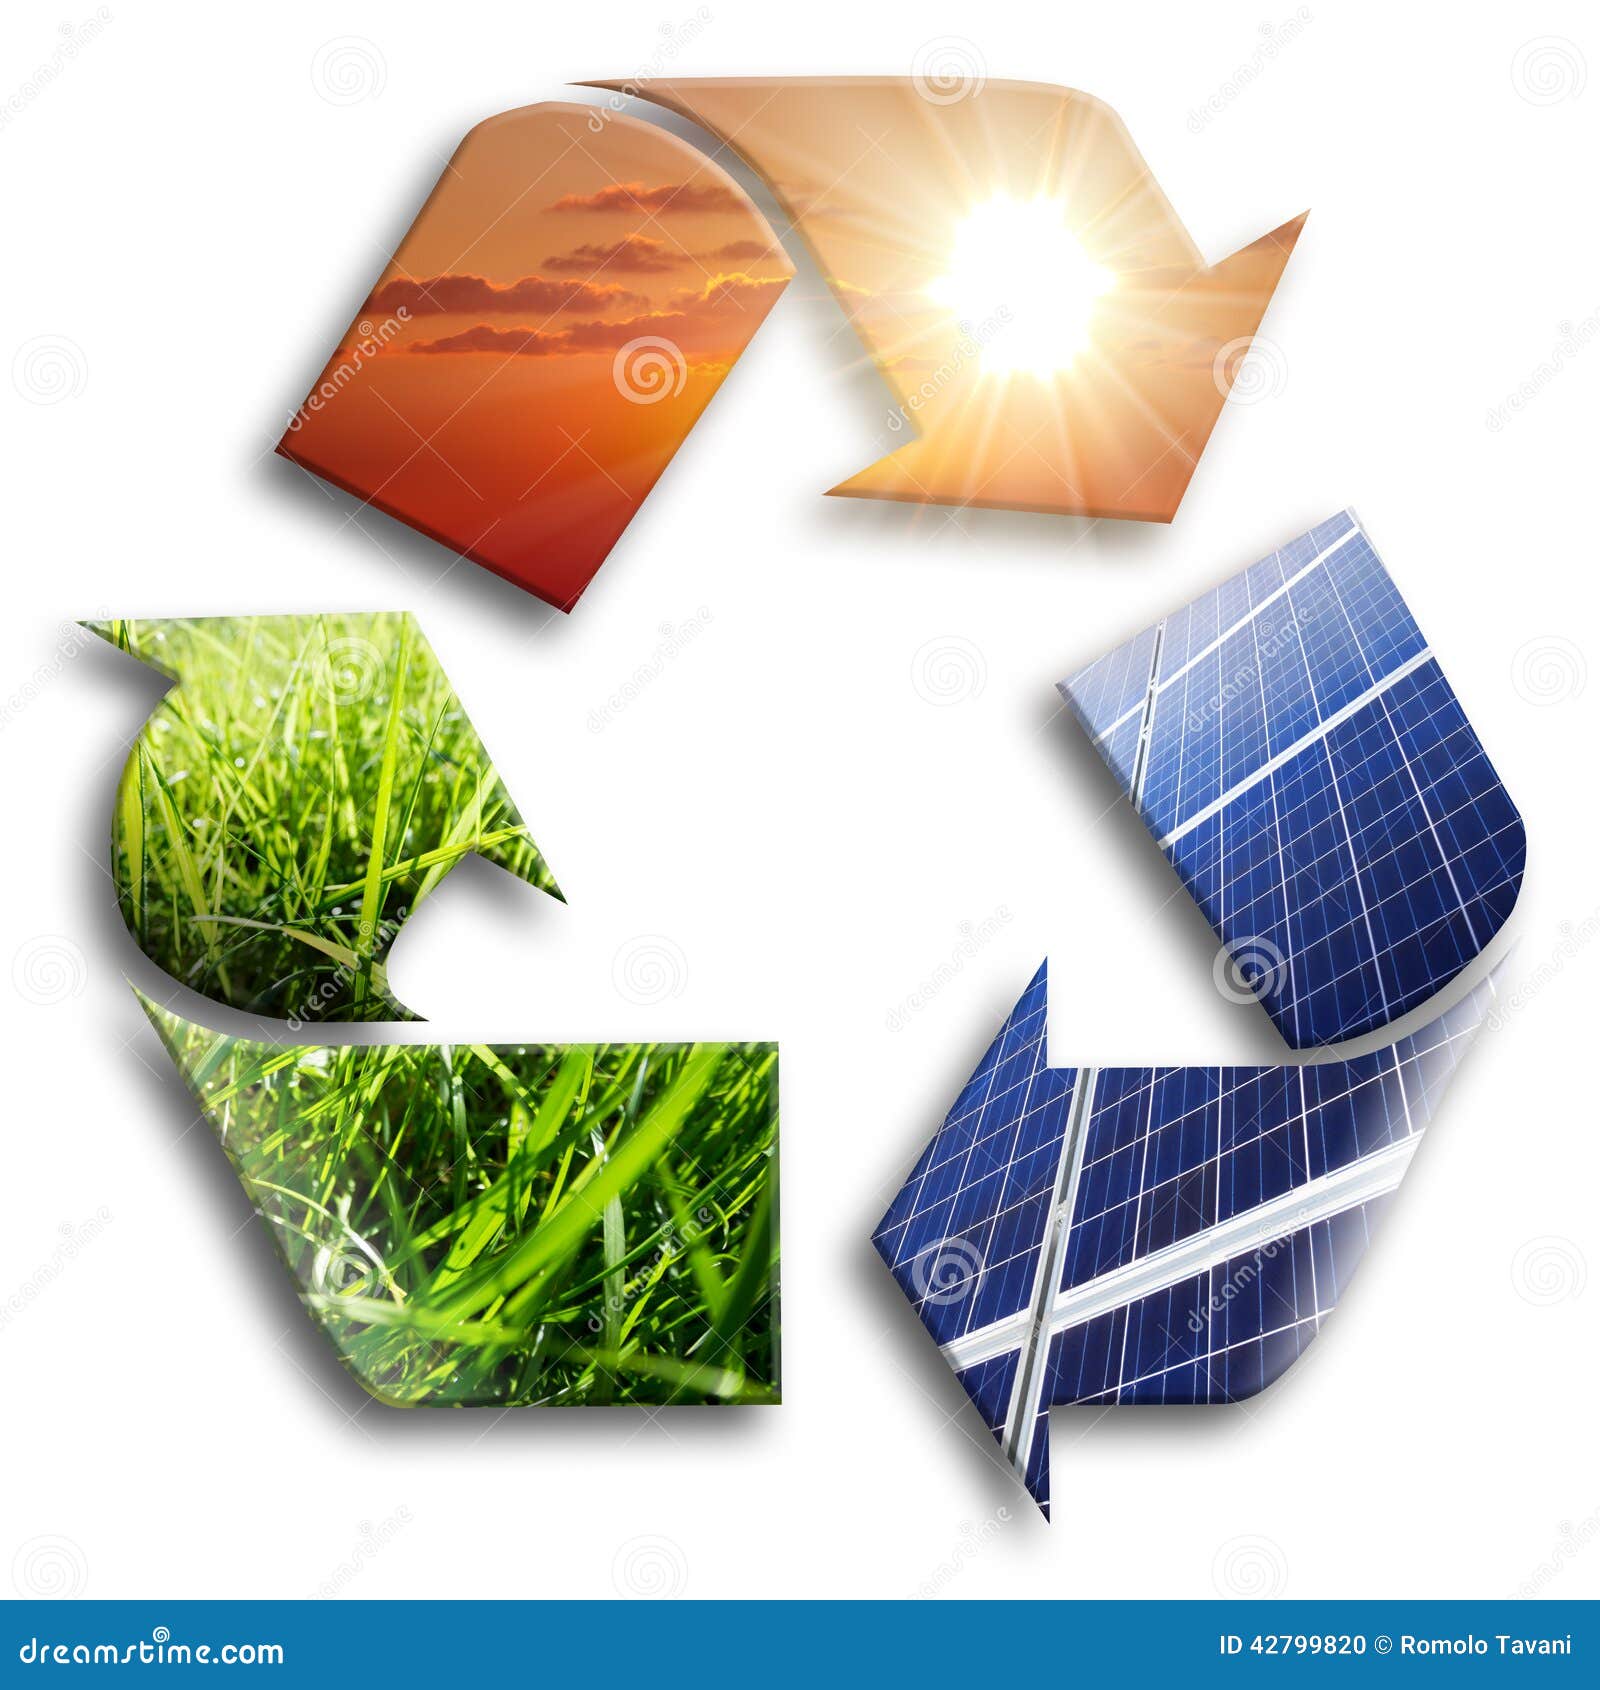 energy recycled: photovoltaic